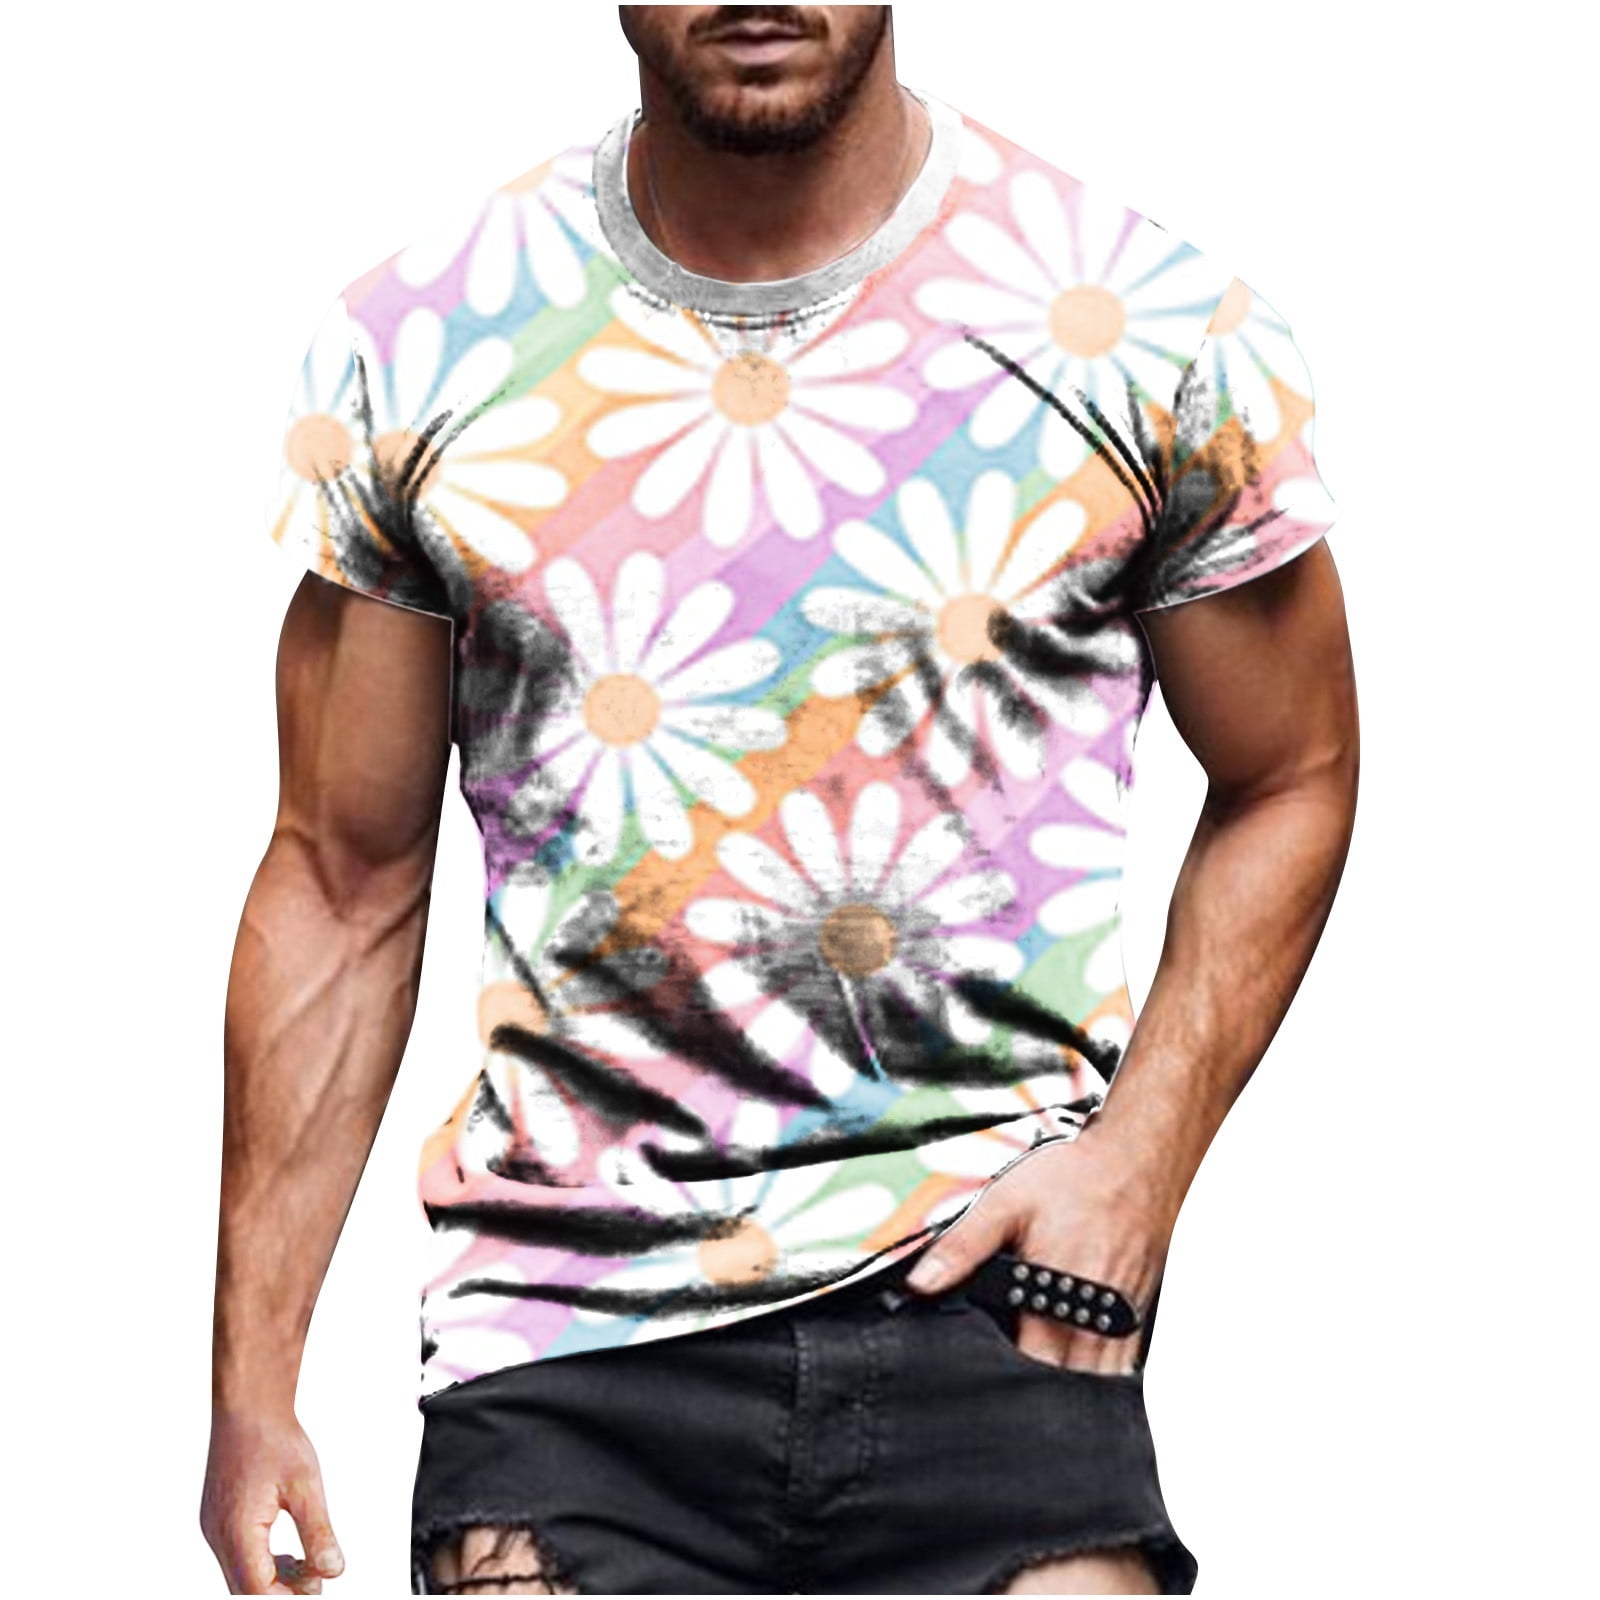 YYDGH On Clearance Men's 3D Shirt's Graphic Tees Flower Print T-Shirts  Short Sleeve Crewneck Casual Tops Trendy Streetwear Fashion with Designs(1#- Green,XL) 